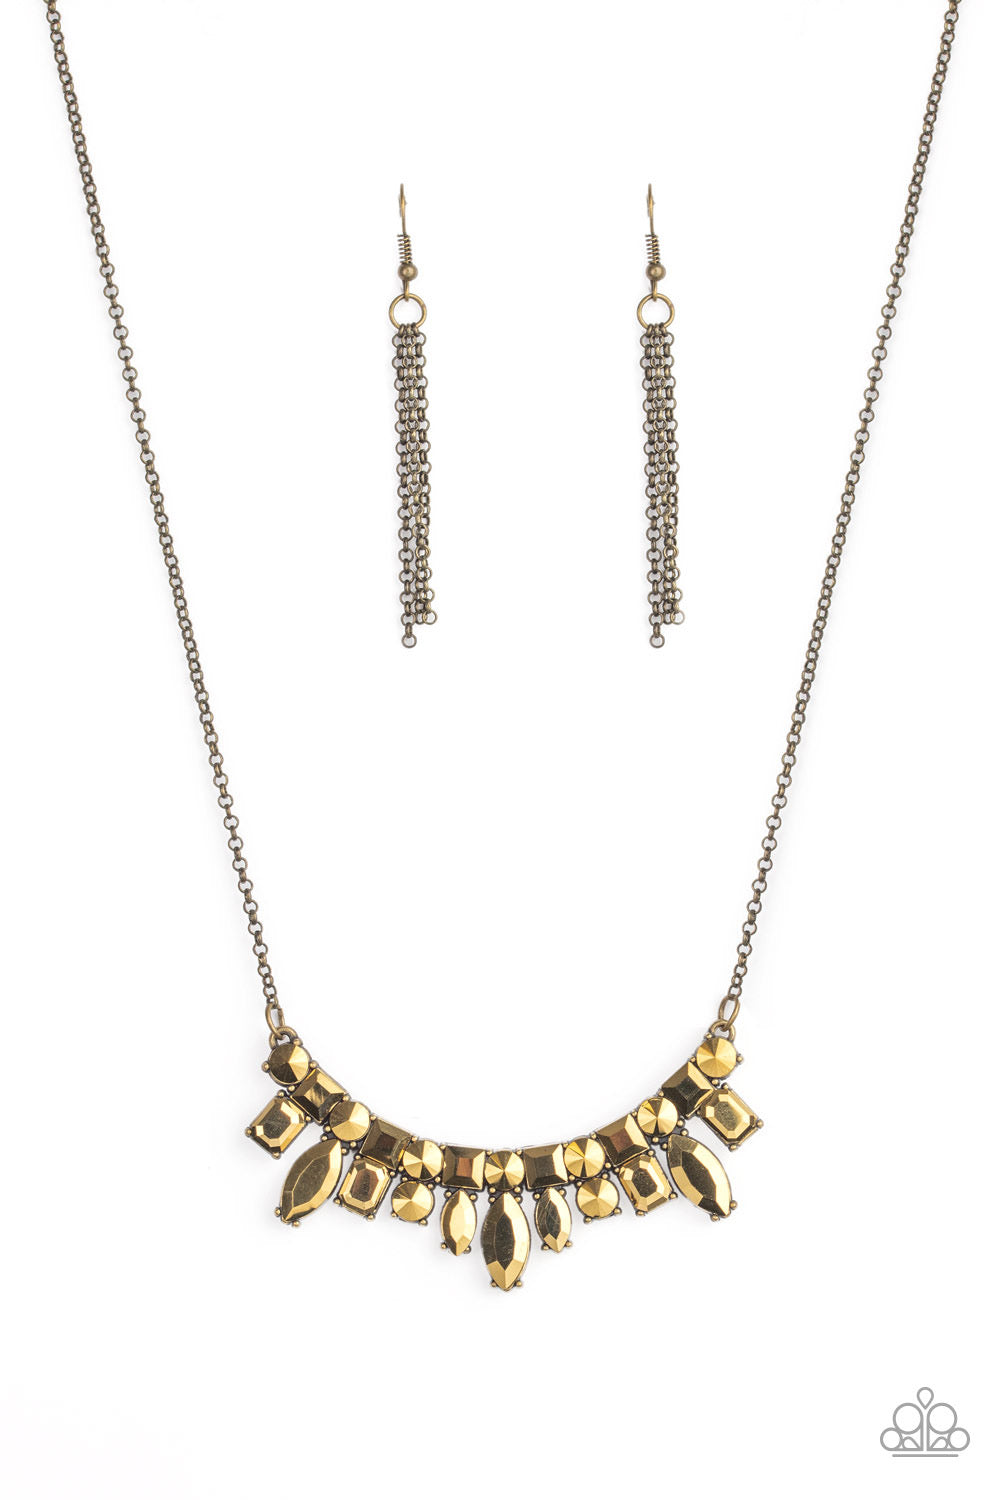 Paparazzi Necklaces Wish Upon a ROCK STAR - Brass